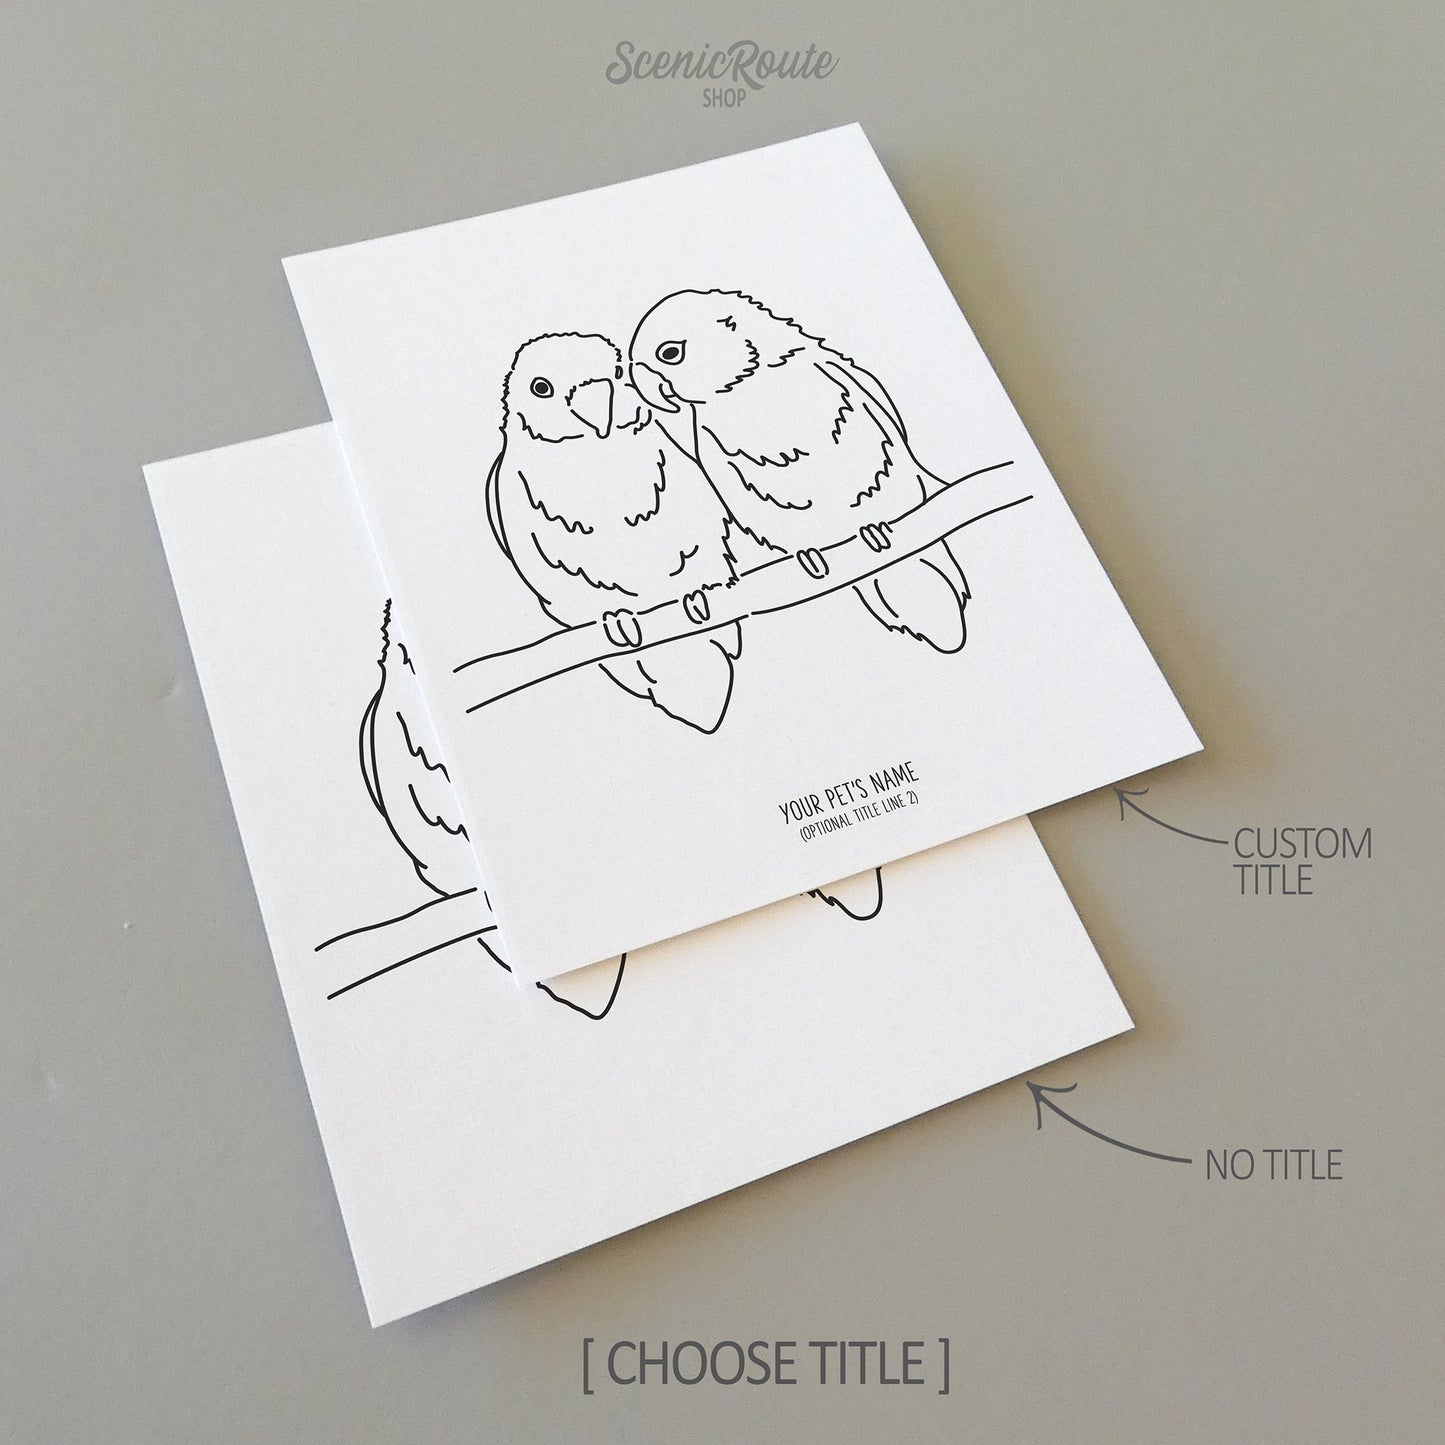 Two line art drawings of two Love Birds on white linen paper with a gray background.  The pieces are shown with “No Title” and “Custom Title” options for the available art print options.